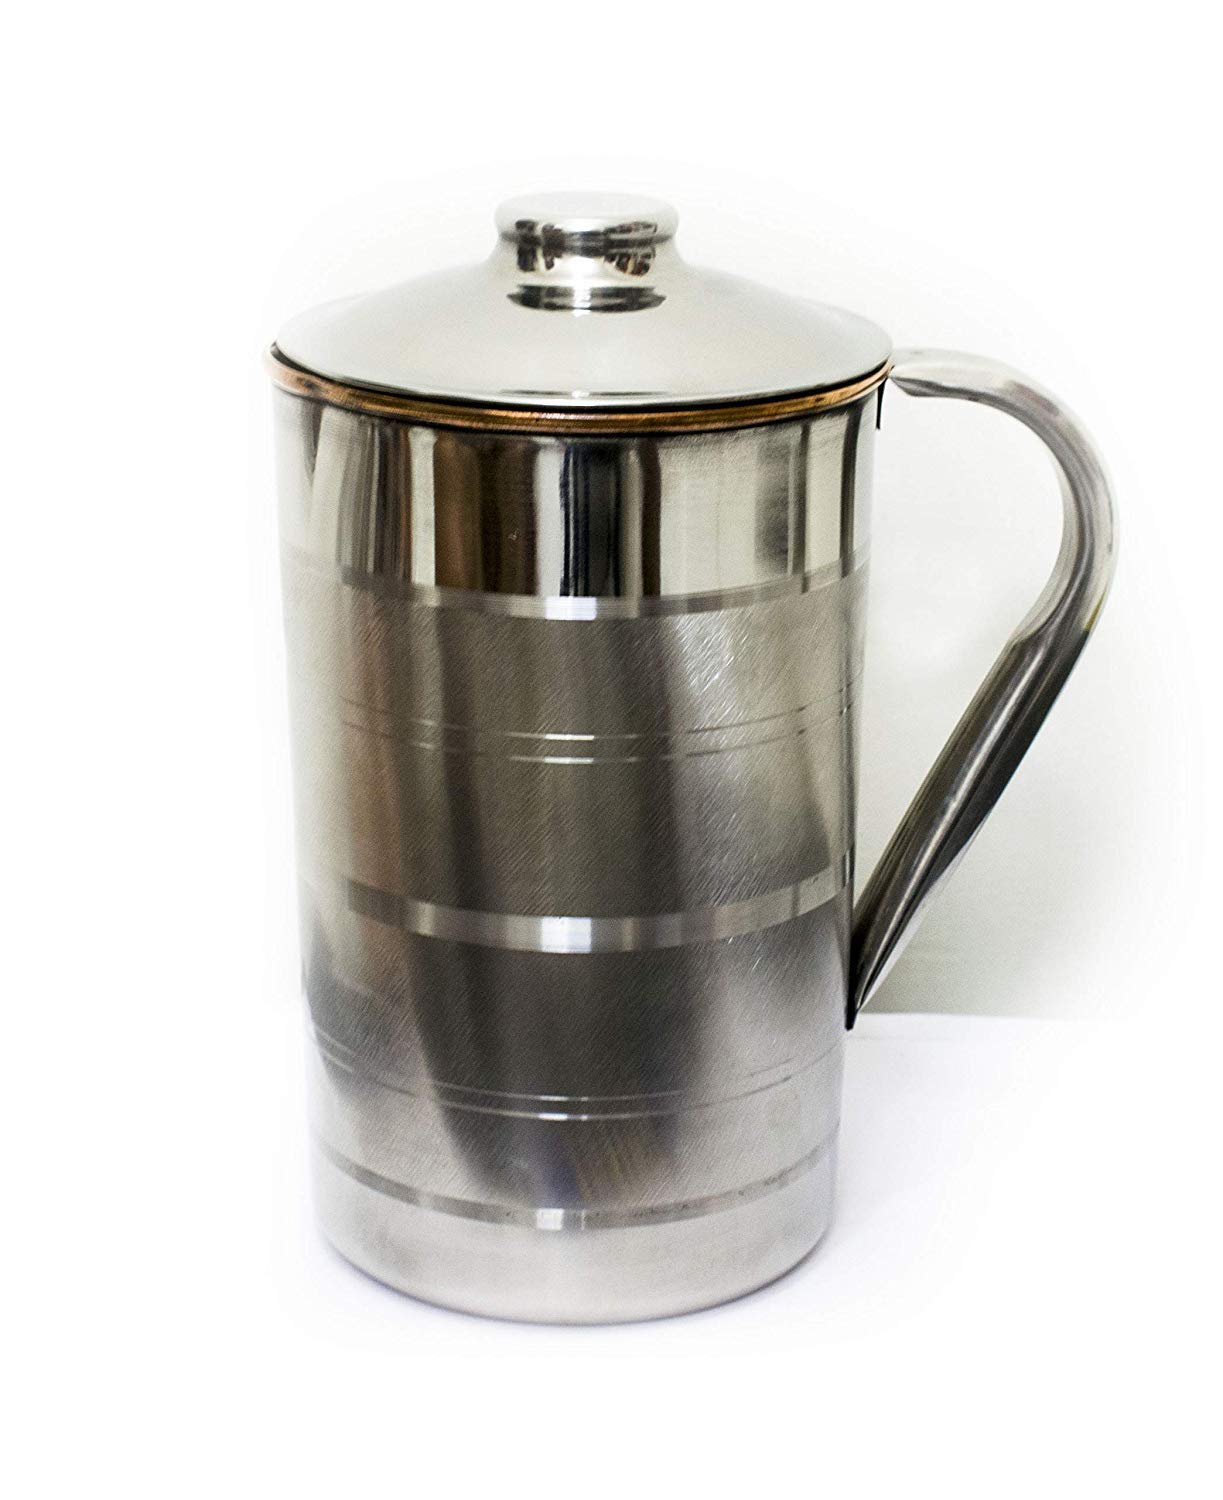 Handmade 1.6 Litre Copper Steel Water Jug Pitcher with Stainless Steel Outer and Inside Pure Copper